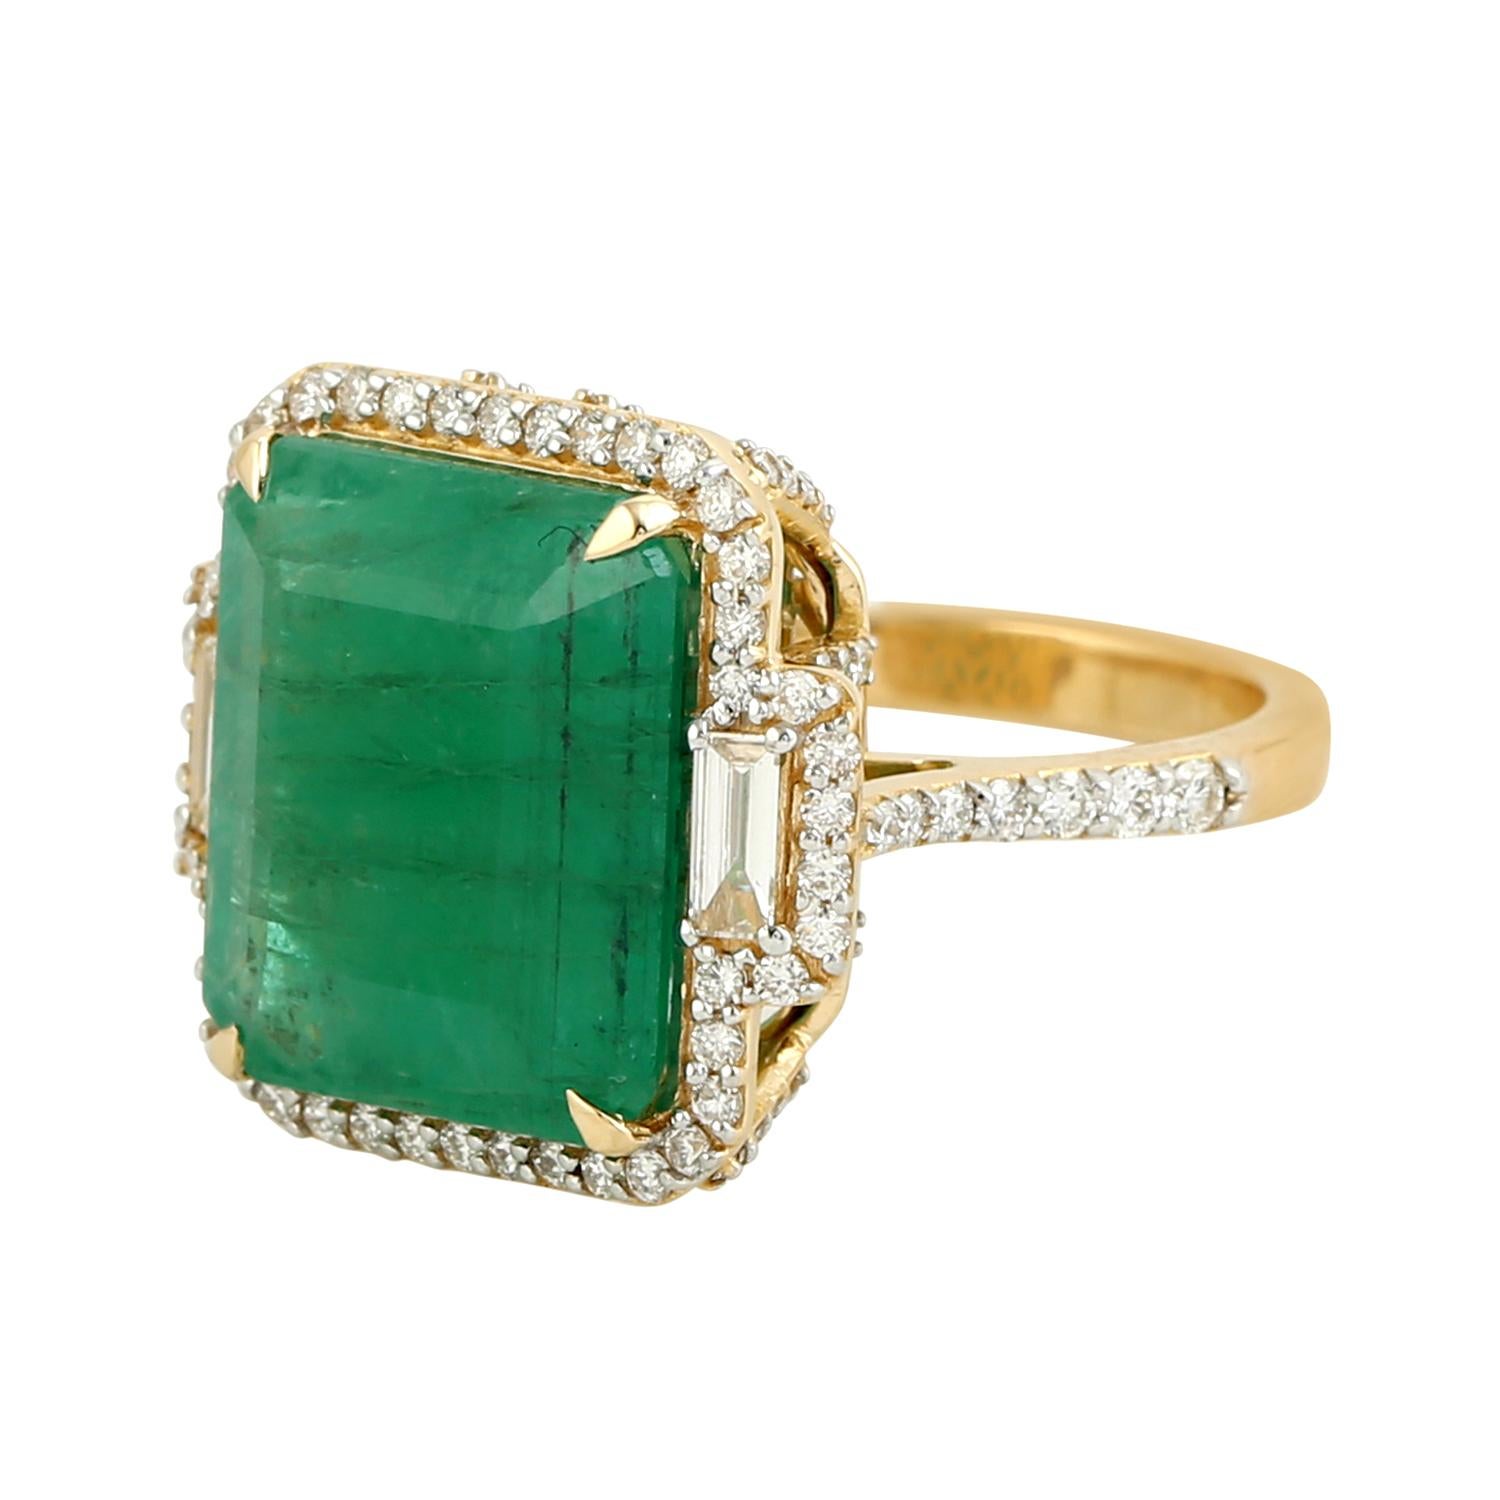 Mixed Cut Cushion Shaped Zambian Emerald Cocktail Ring With Diamonds For Sale